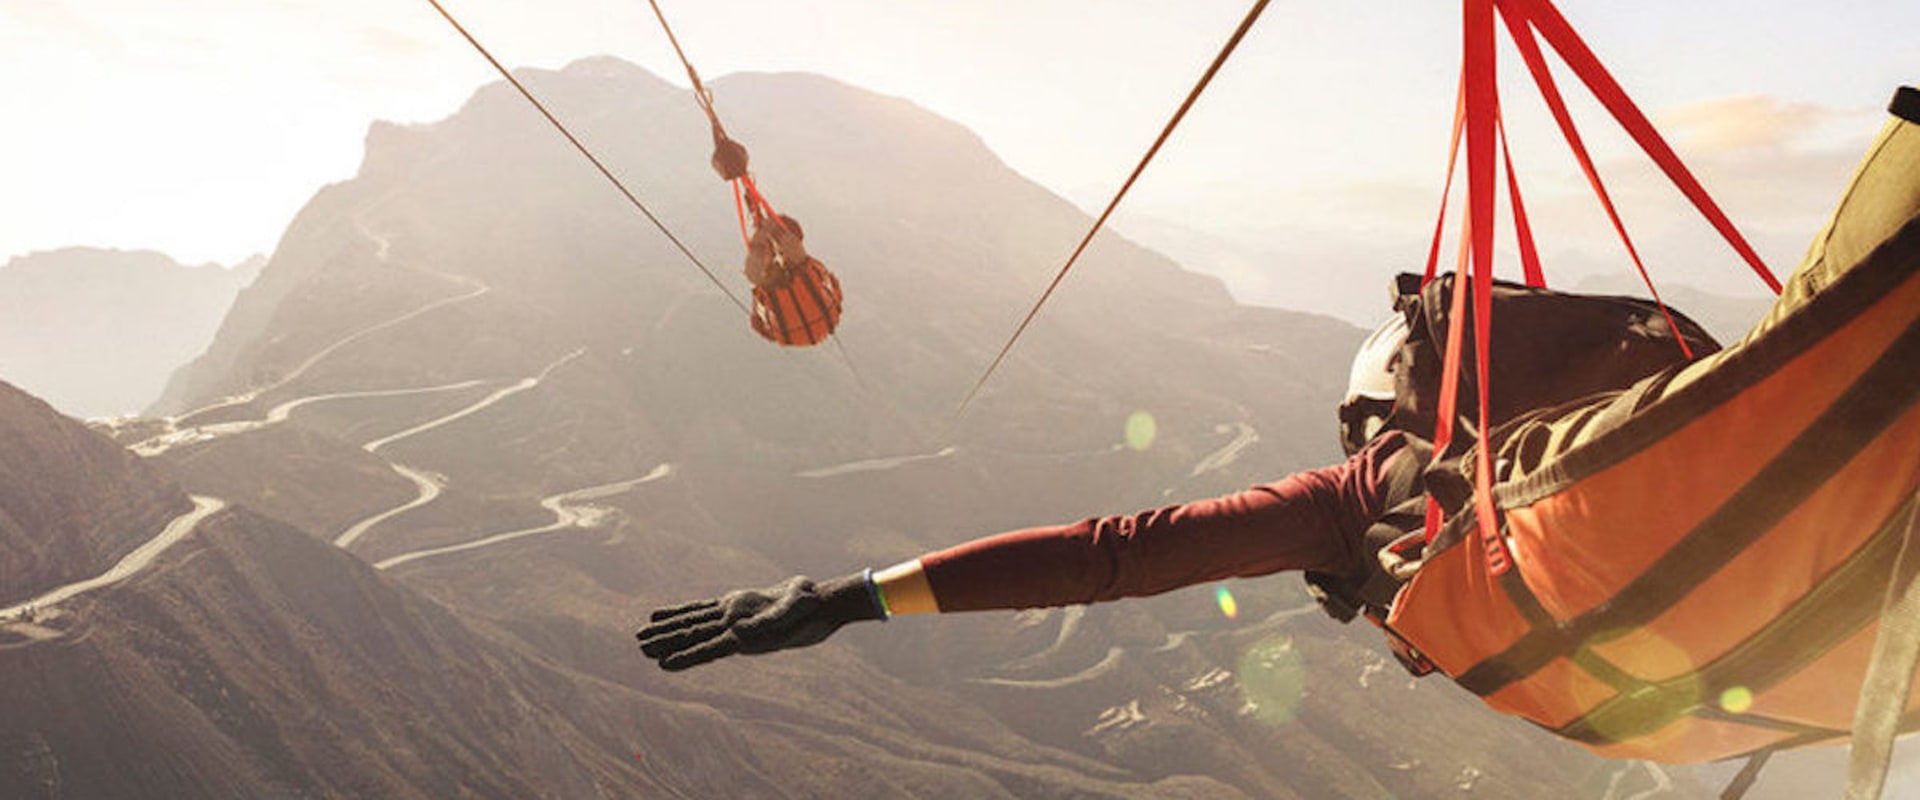 Where is the longest and fastest zipline in the world?